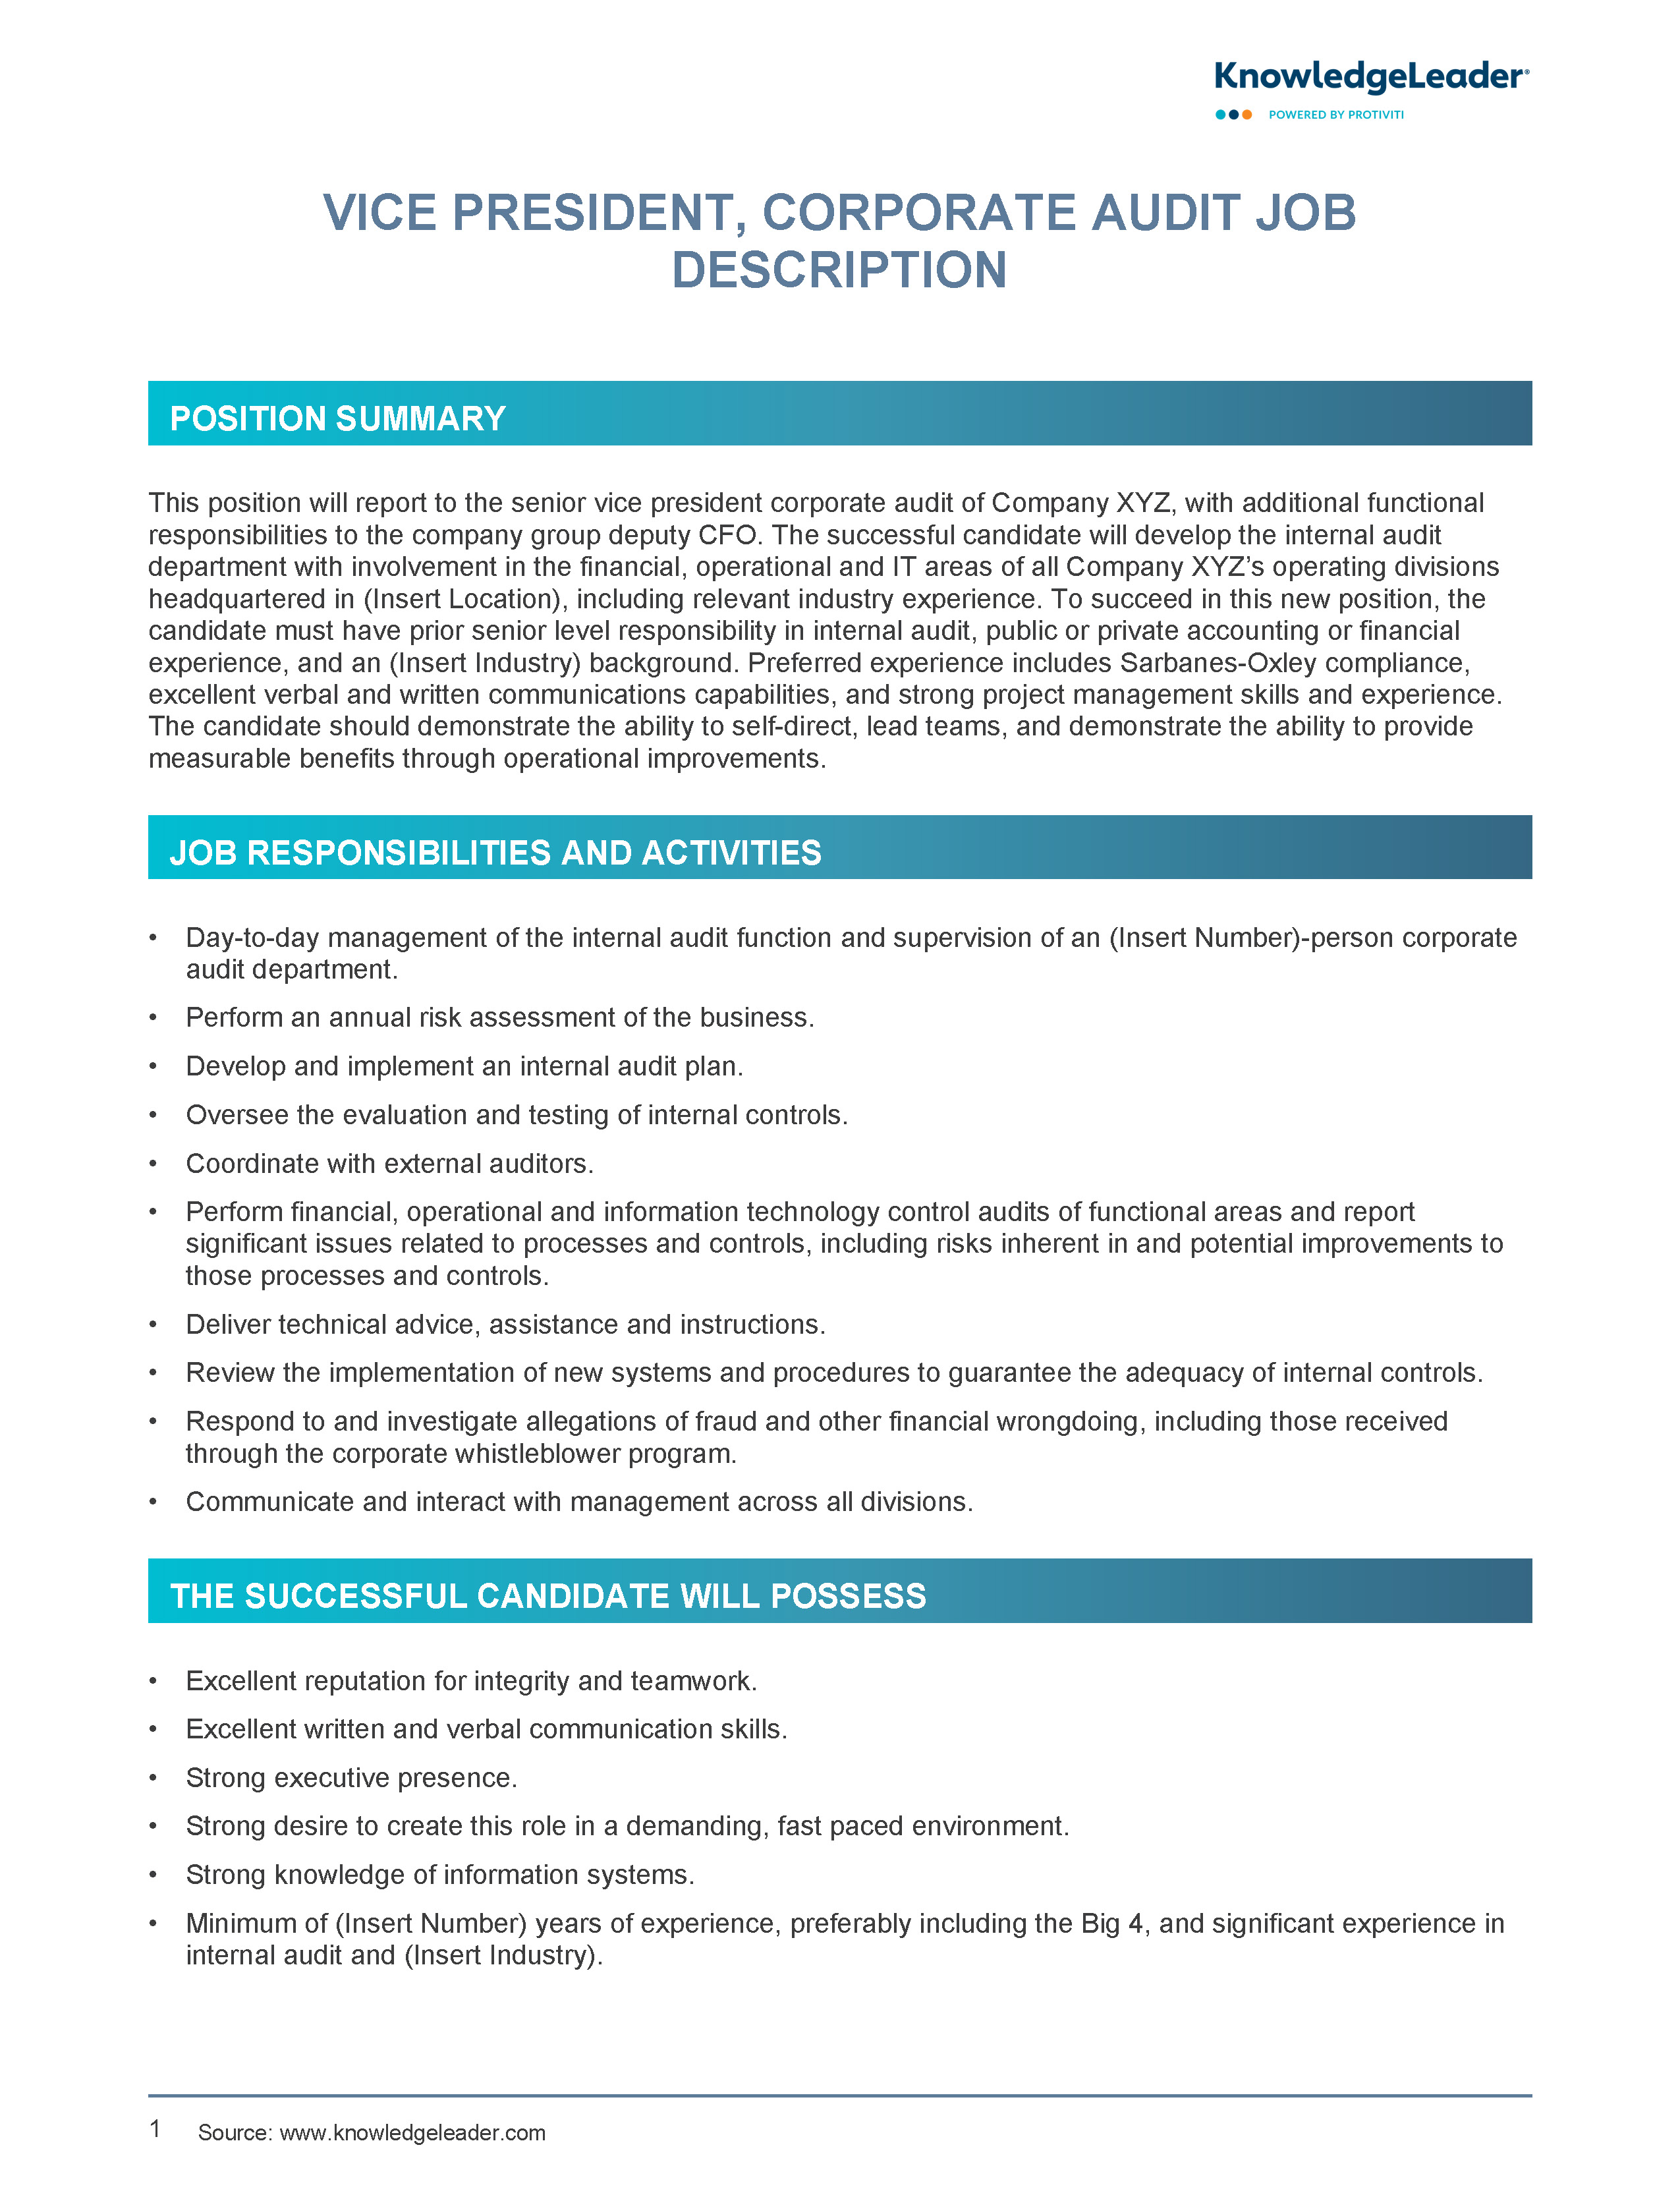 Screenshot of the first page of Vice President, Corporate Audit Job Description